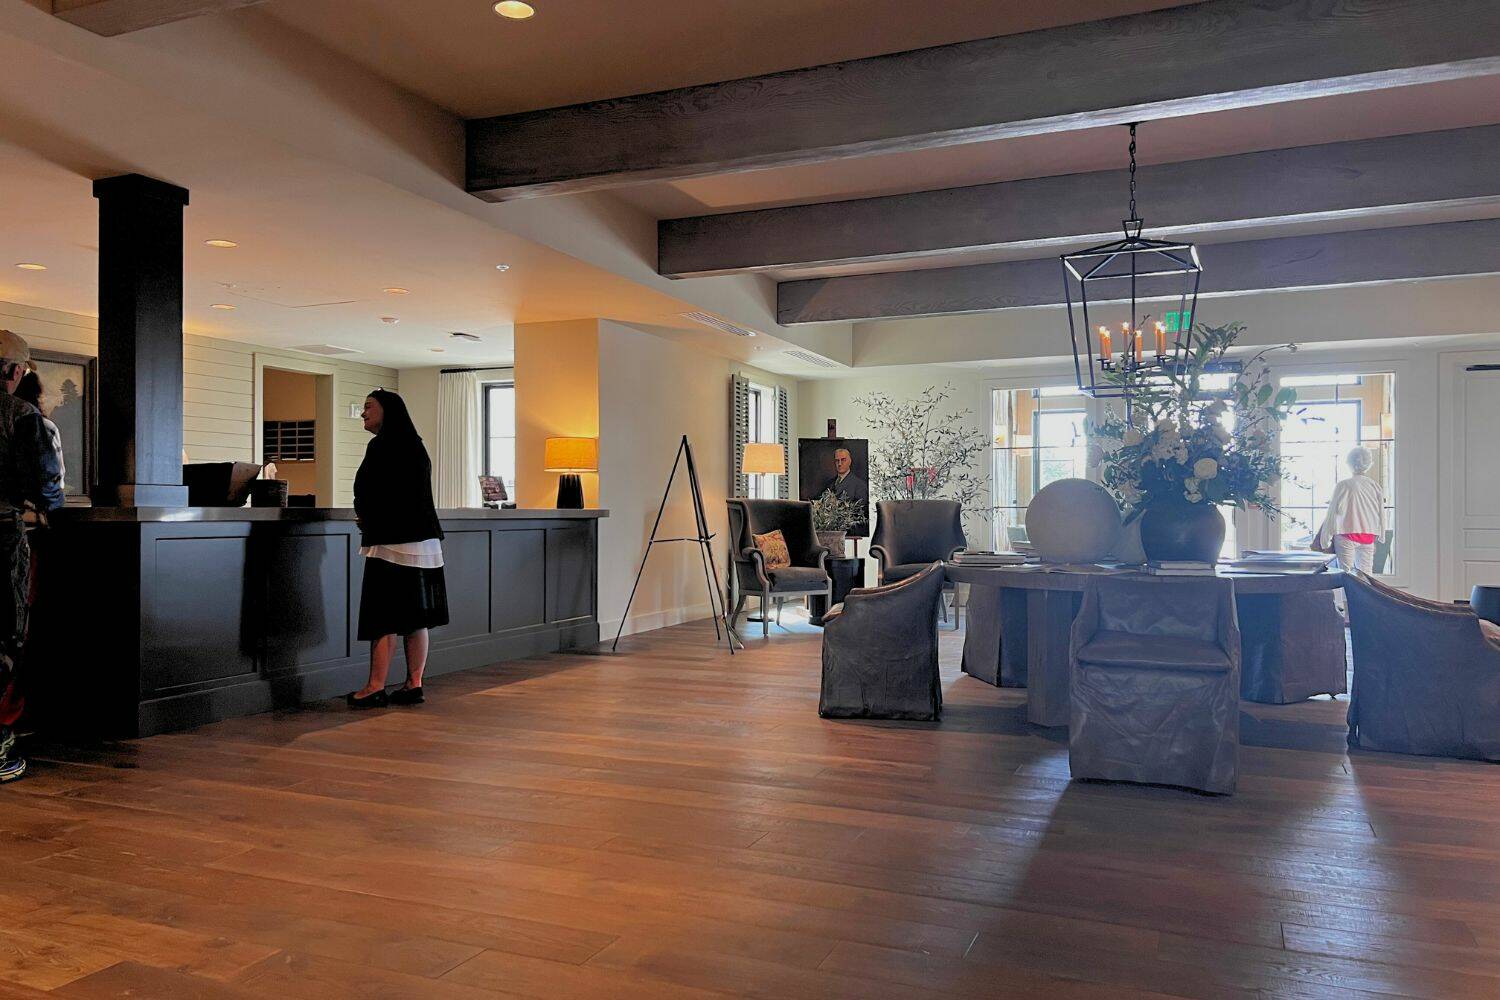 Reception desk and lobby entrance at the Weatherly Inn. Cameron Sheppard / Renton Reporter